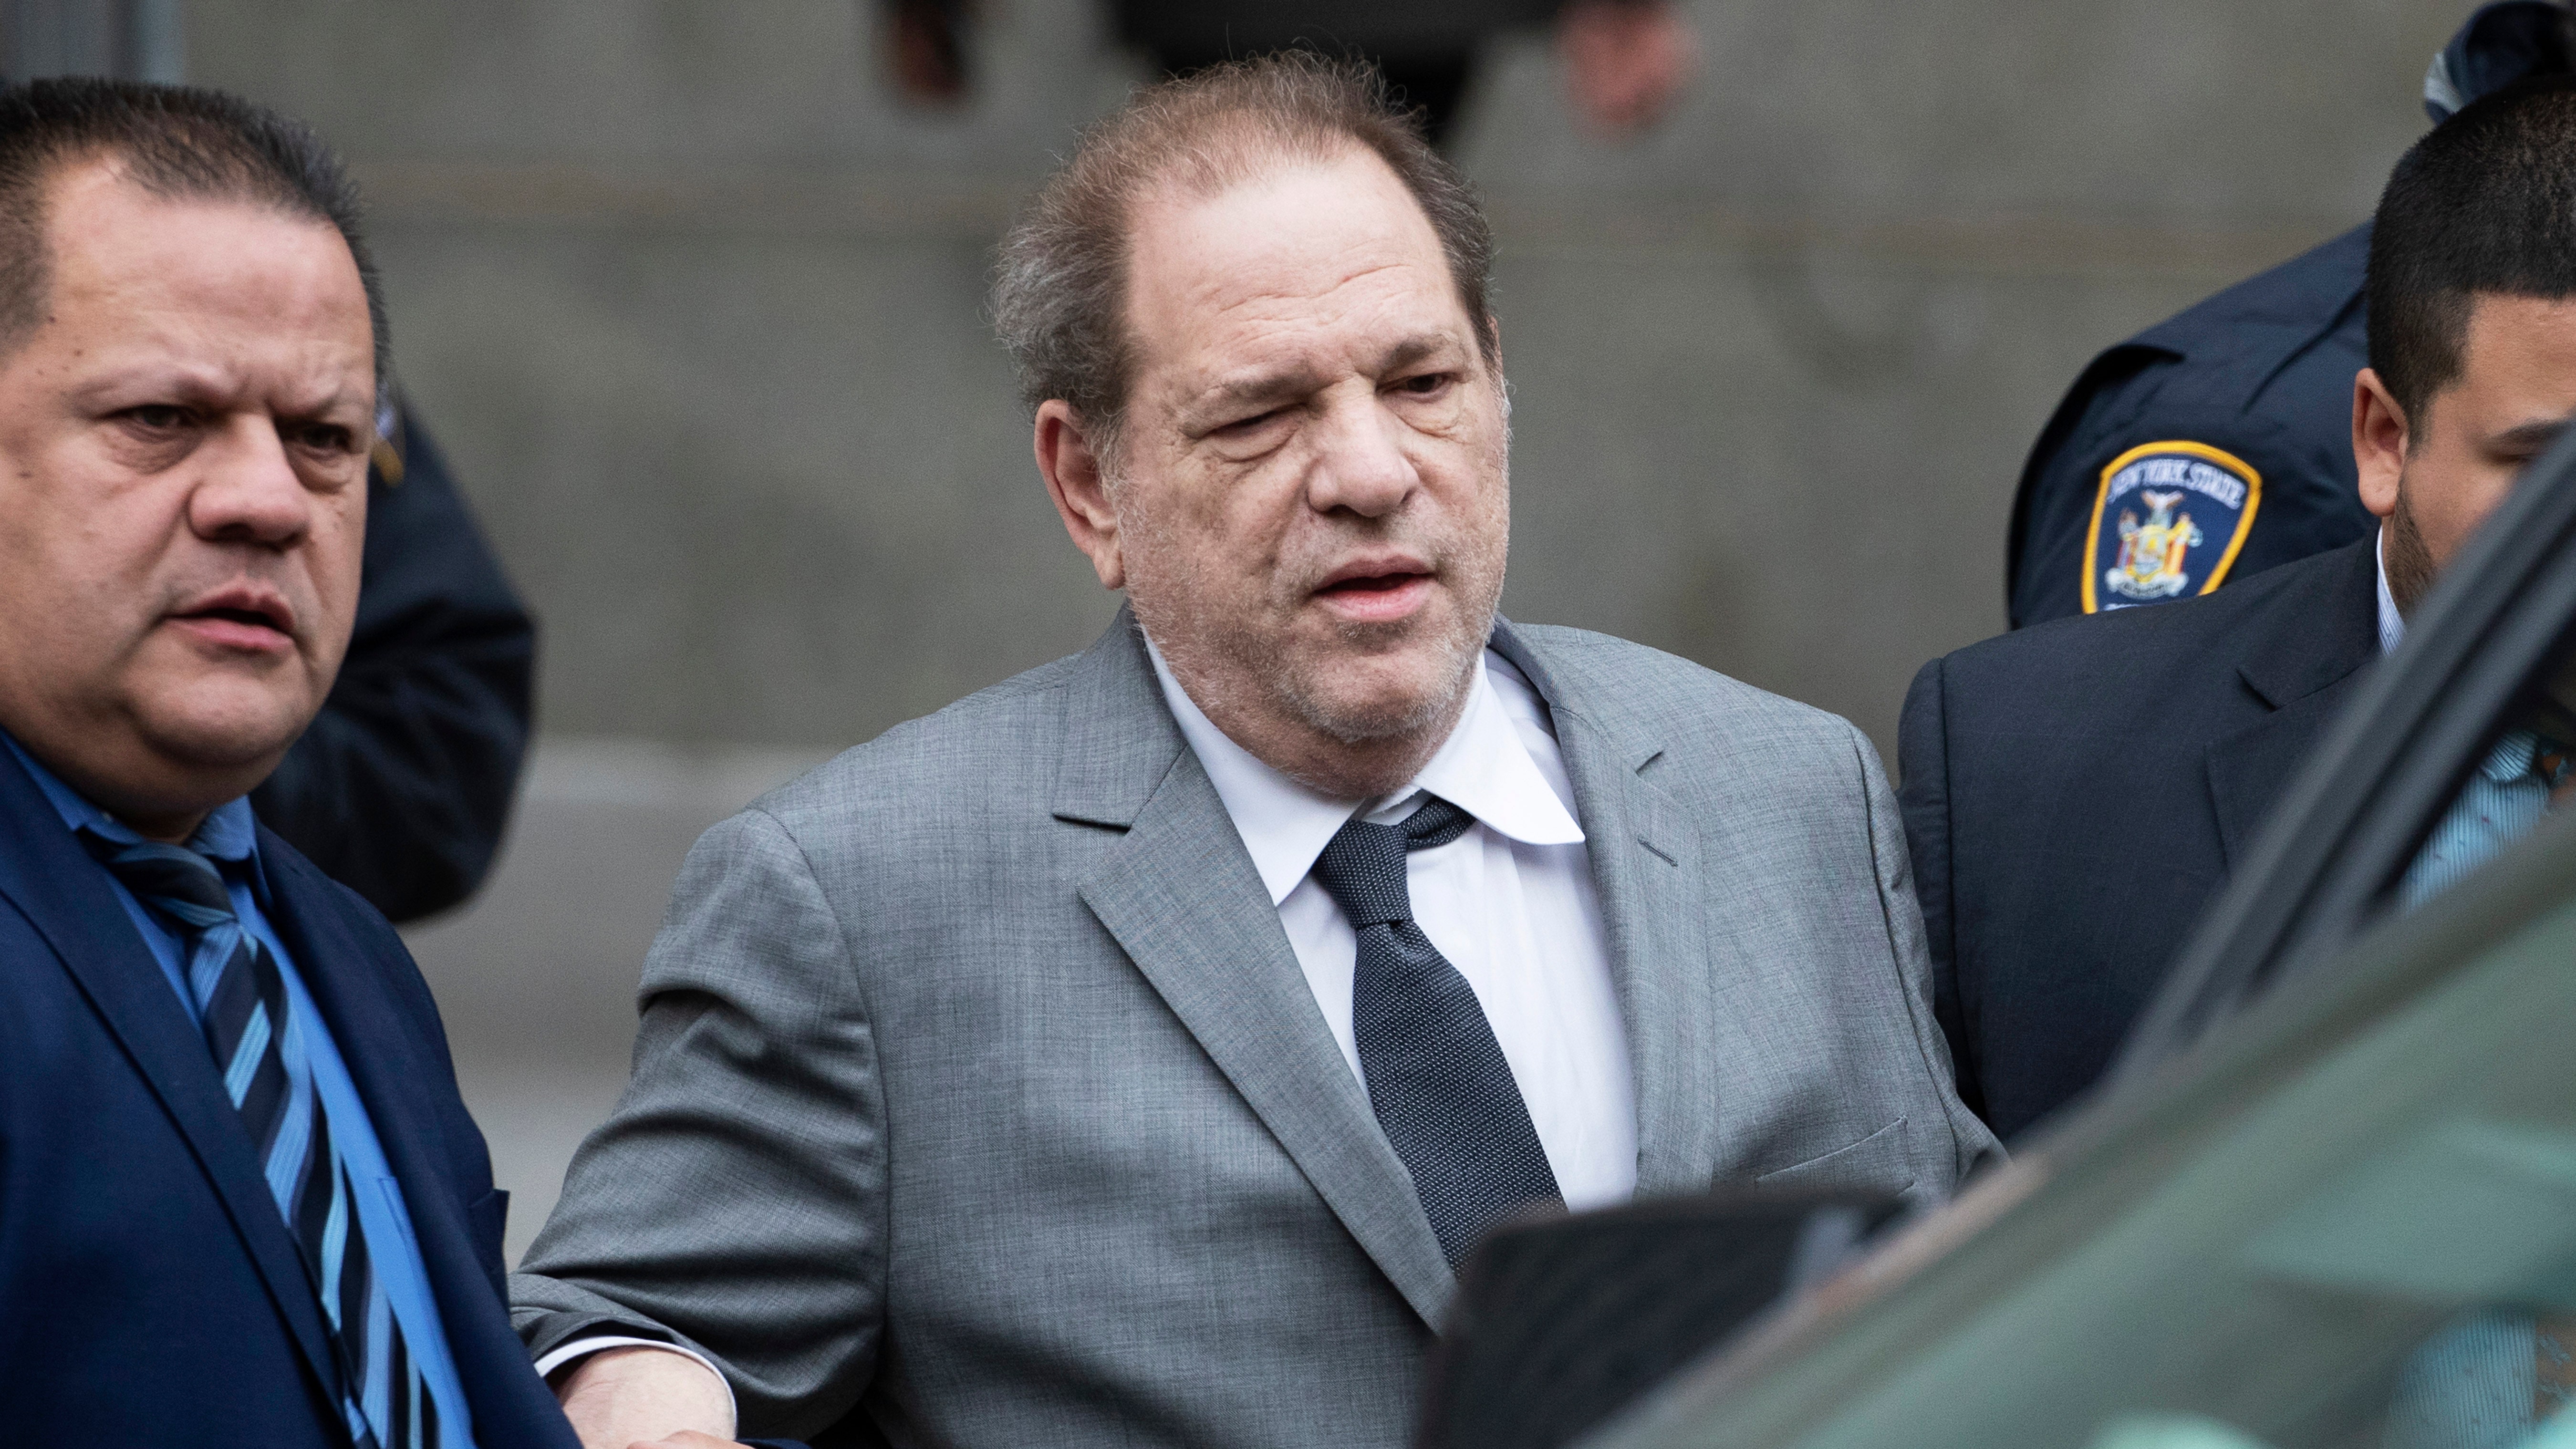 Harvey Weinstein appeals the conviction, lawyers say the judge “neglected” a fair trial